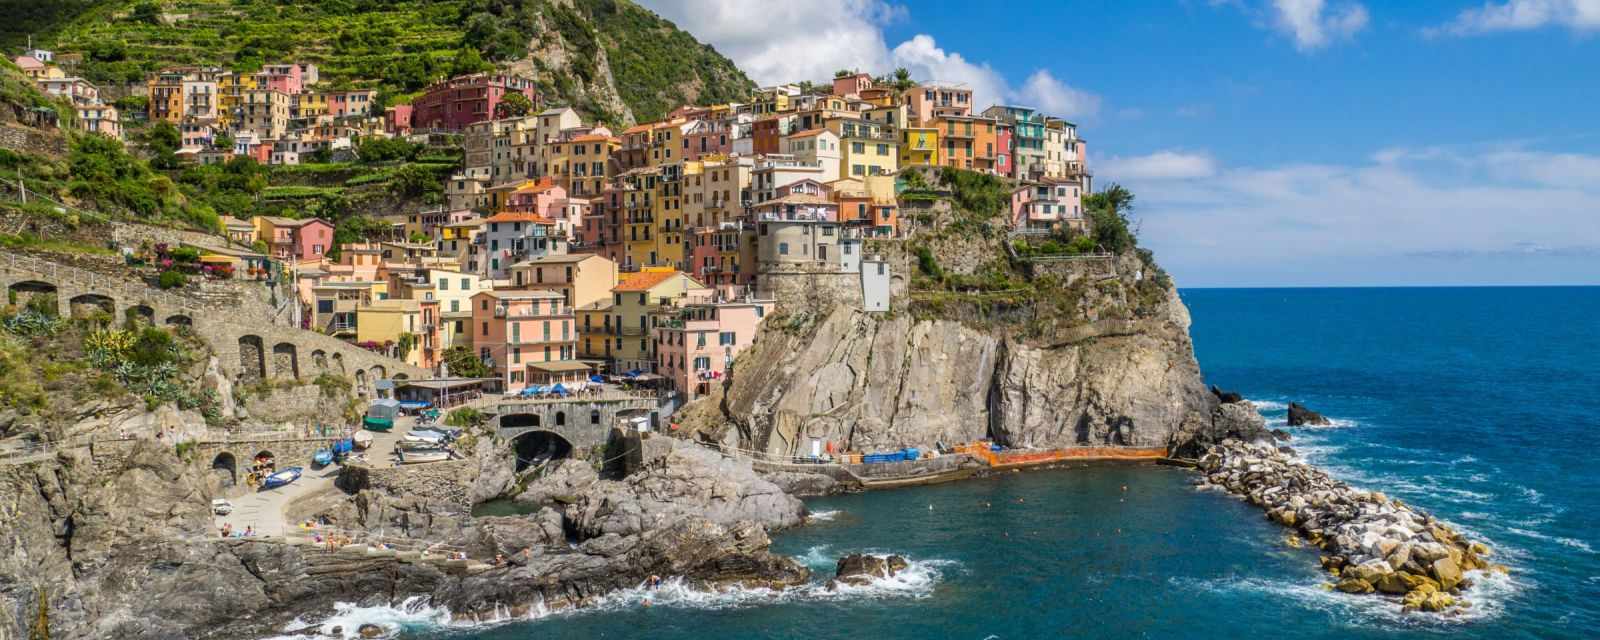 Cinque Terre Are Five Villages in Liguria - One Day Itinerary